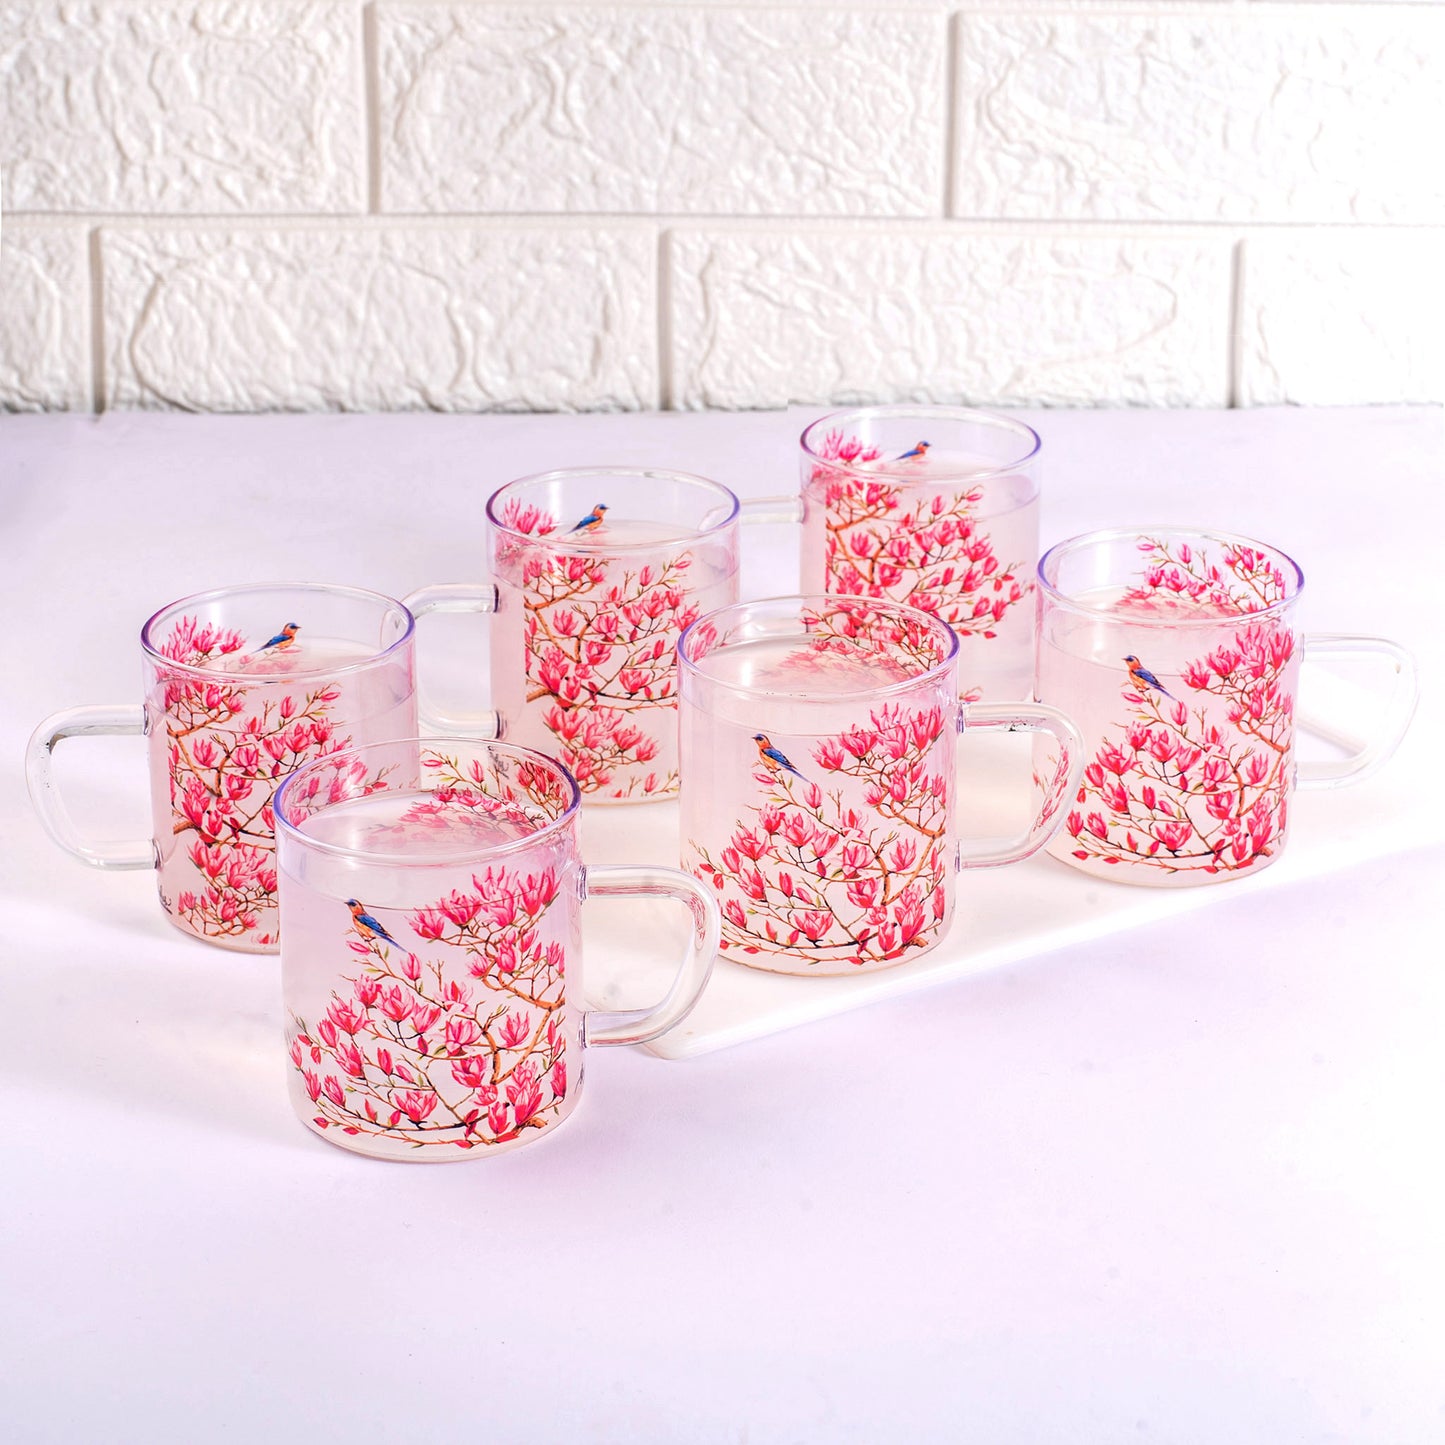 Pink Magnolias Tea cups - Set of 4 and 6